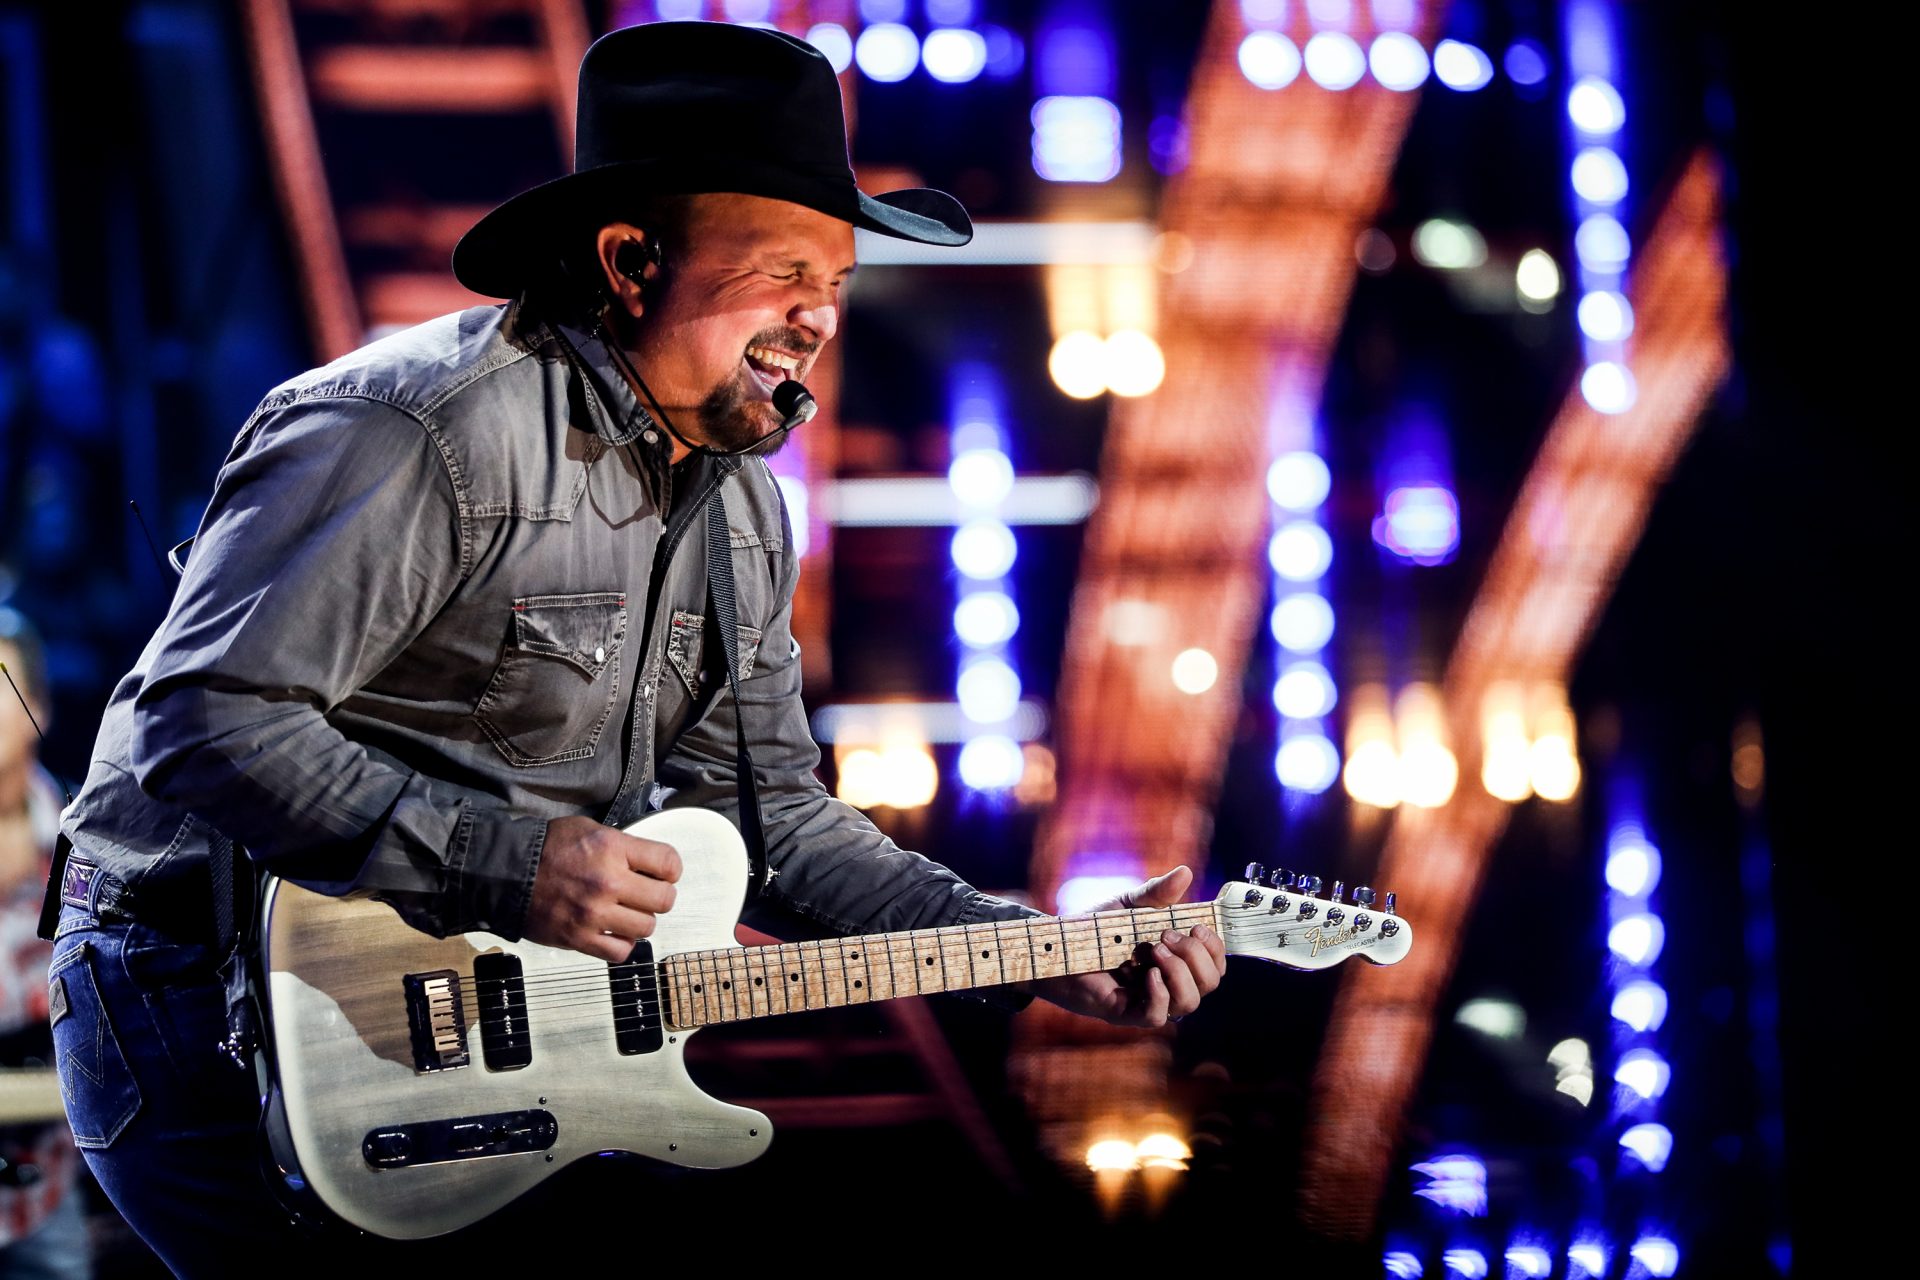 <p>American country singer Garth Brooks played five sold-out dates in September 2022 at Dublin's Croke Park, triggering a national Garth-mania. When he was asked in 2024 on a livestream about Ireland, he said he cries the whole time he watches footage of the 2022 gigs. What's the deal with this odd connection?</p>